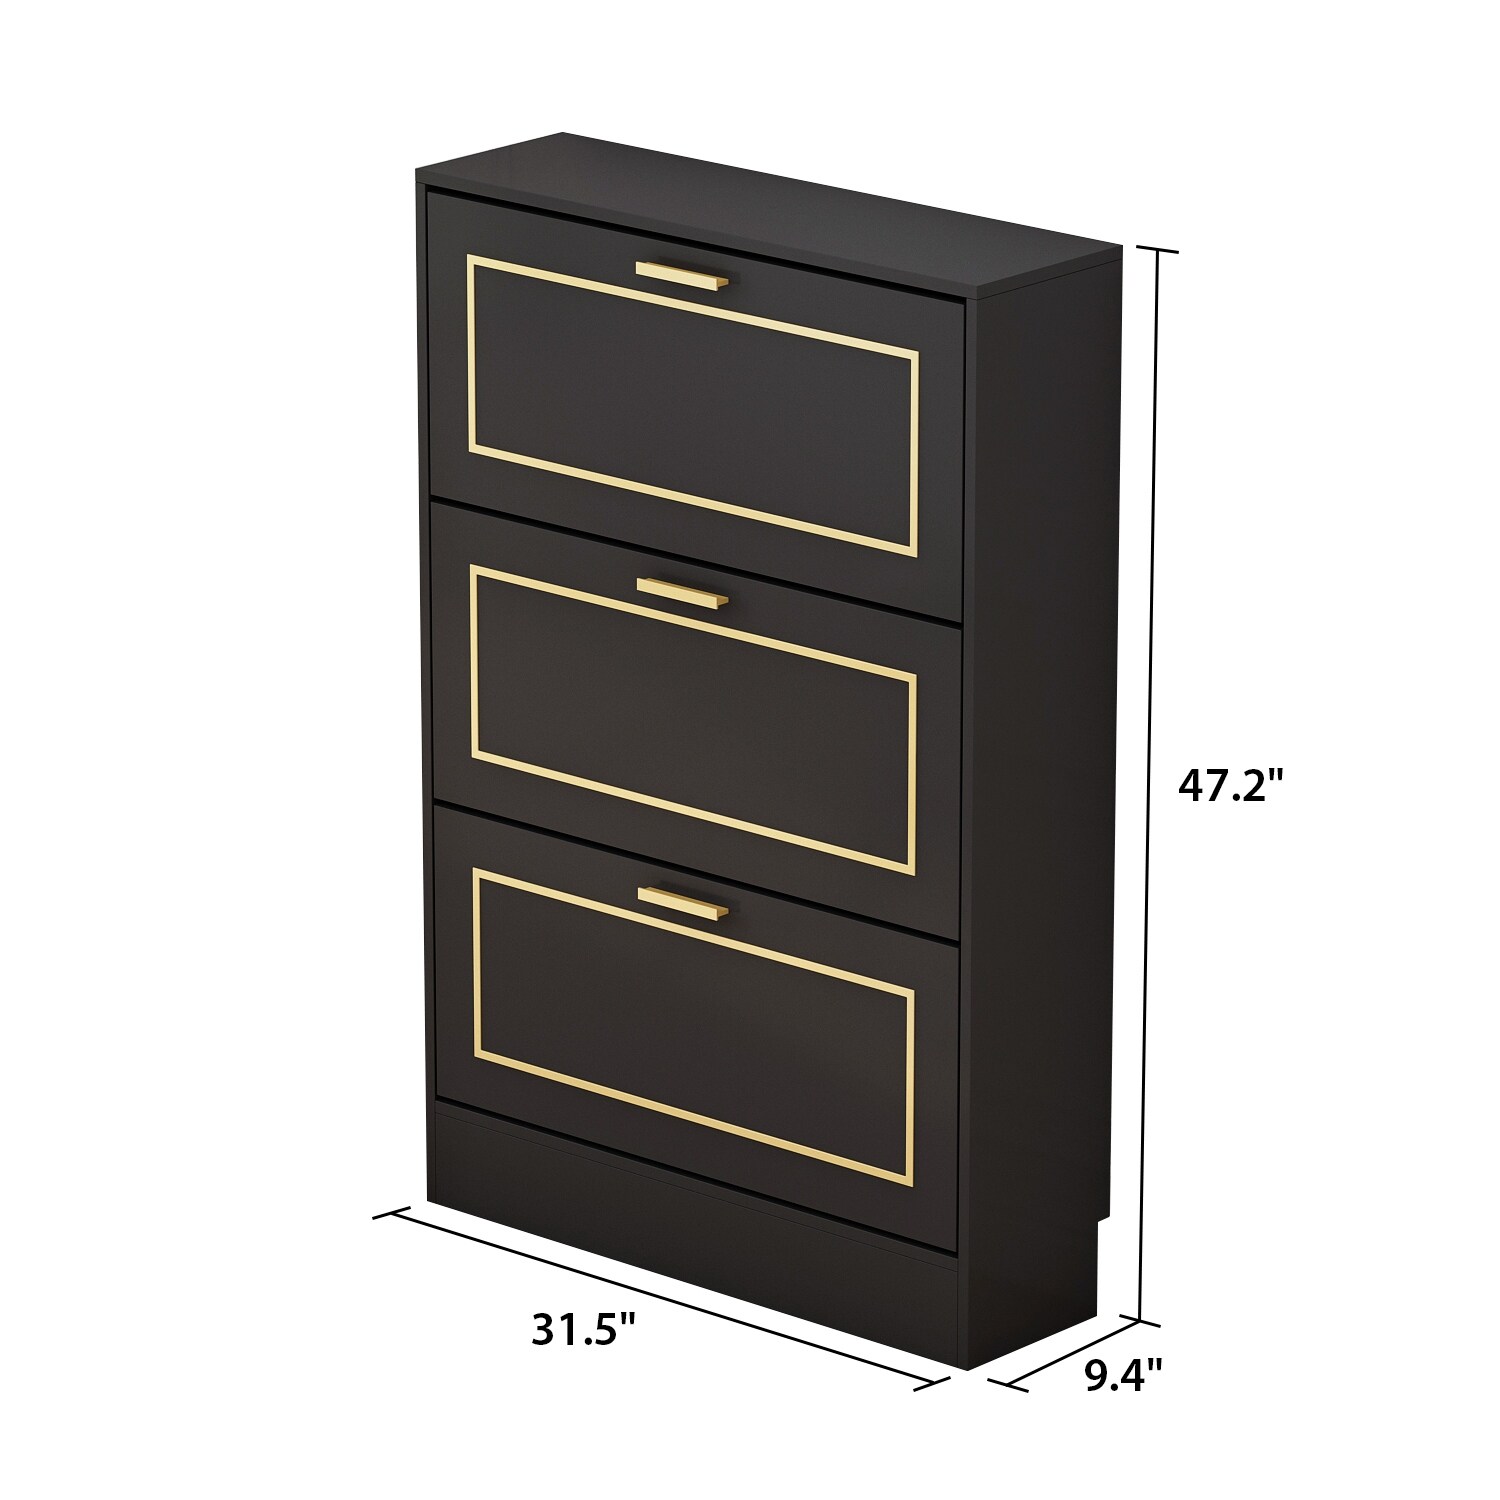 https://ak1.ostkcdn.com/images/products/is/images/direct/0d159b0e6113c629741bd81fe1eace2c73786754/FUFU%26GAGA-Fold-out-3-drawers-Shoes-Cabinet.jpg